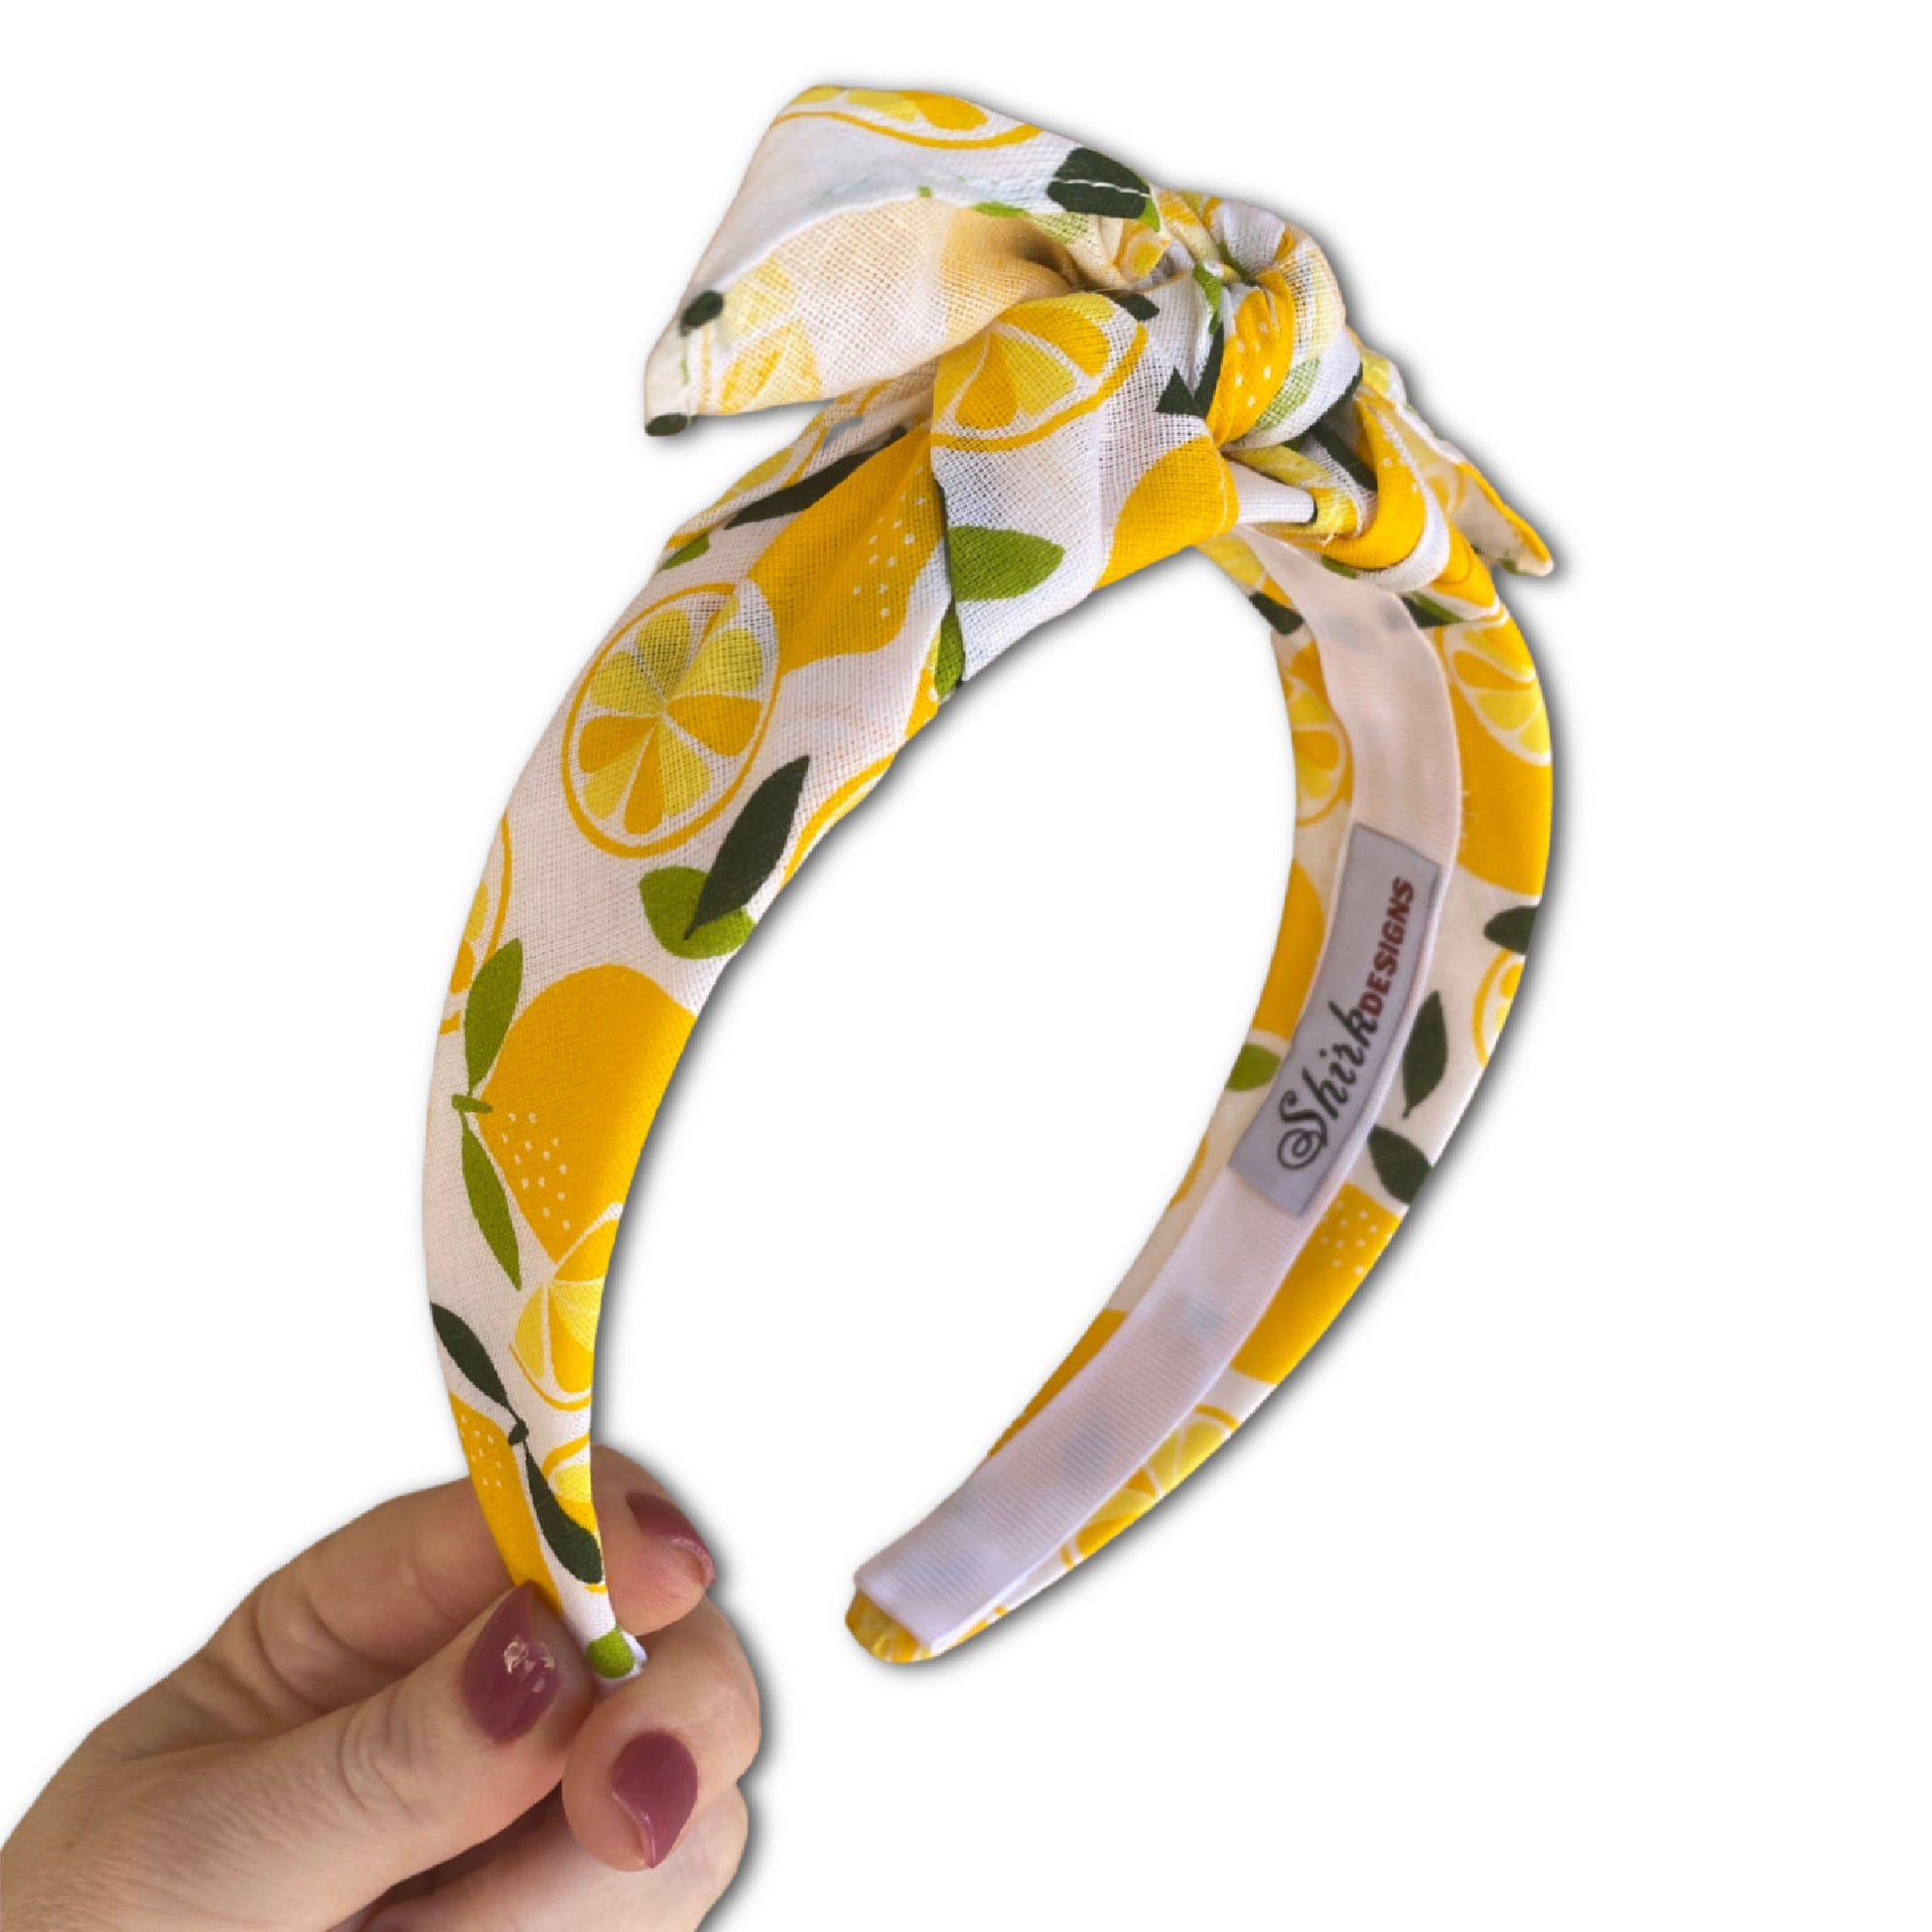 Headband that has large yellow lemon print with a white background. Tied off center at the top